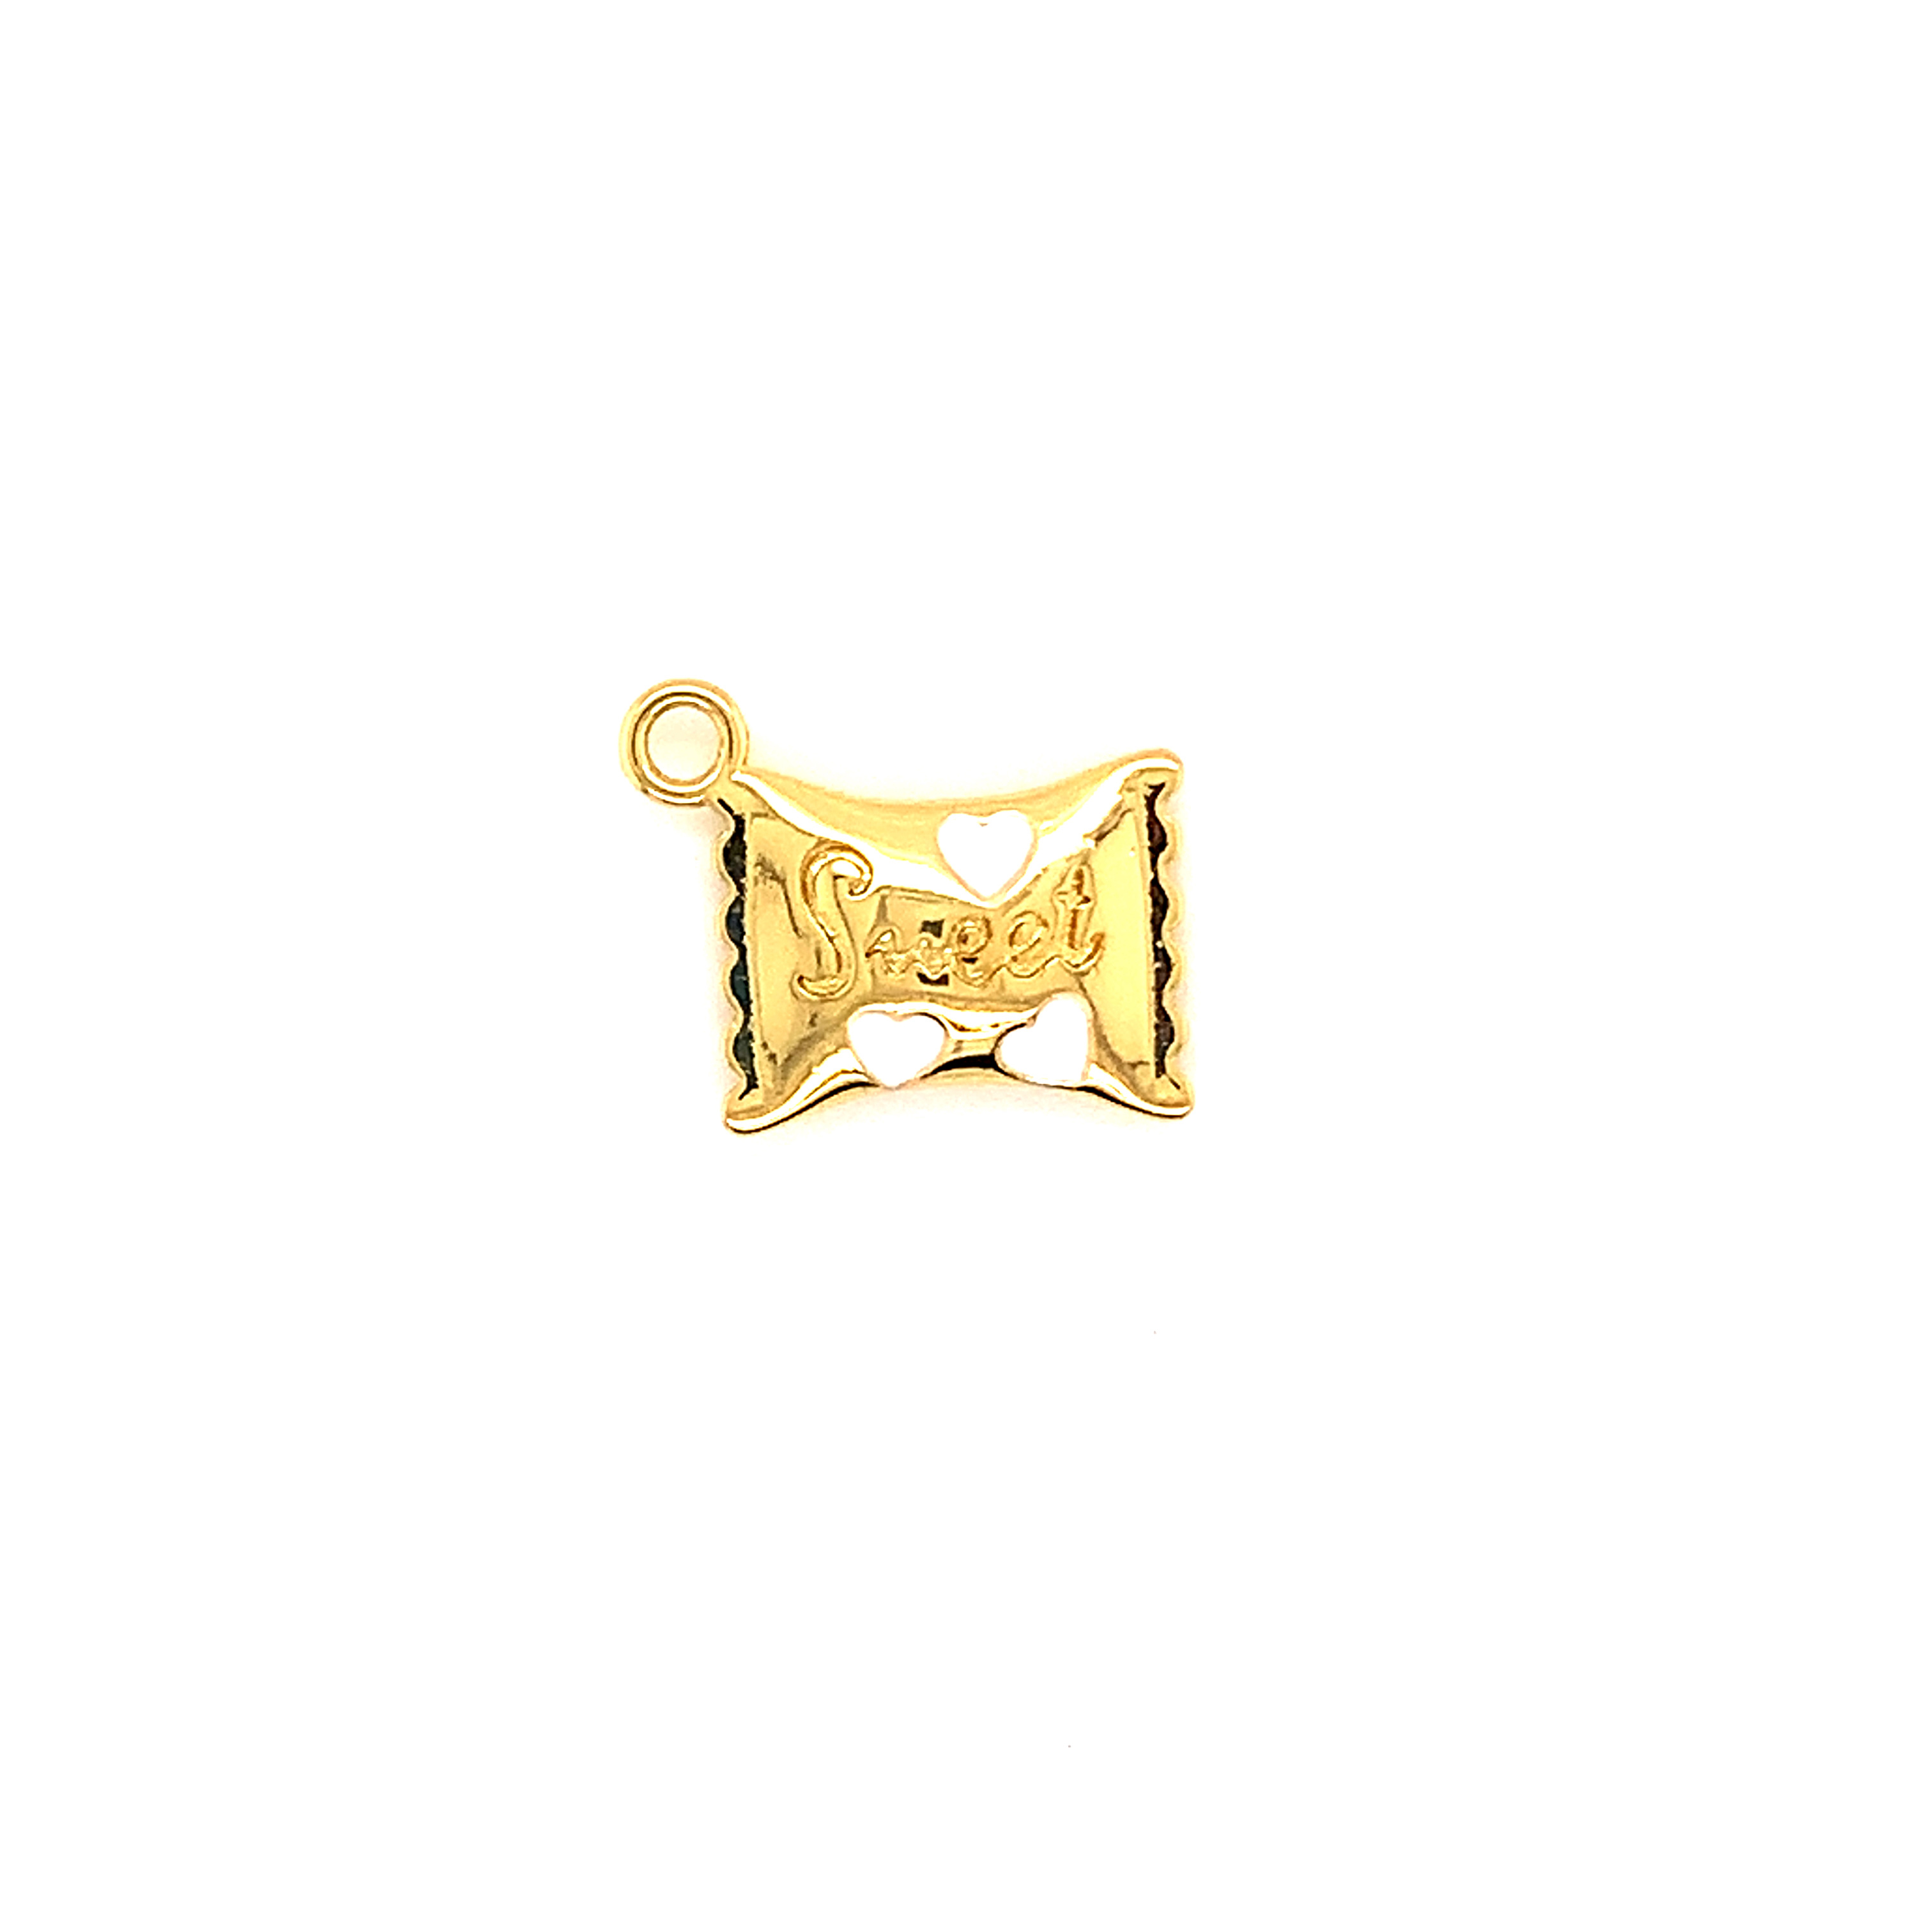 White Enamel Candy Charm - Gold Plated